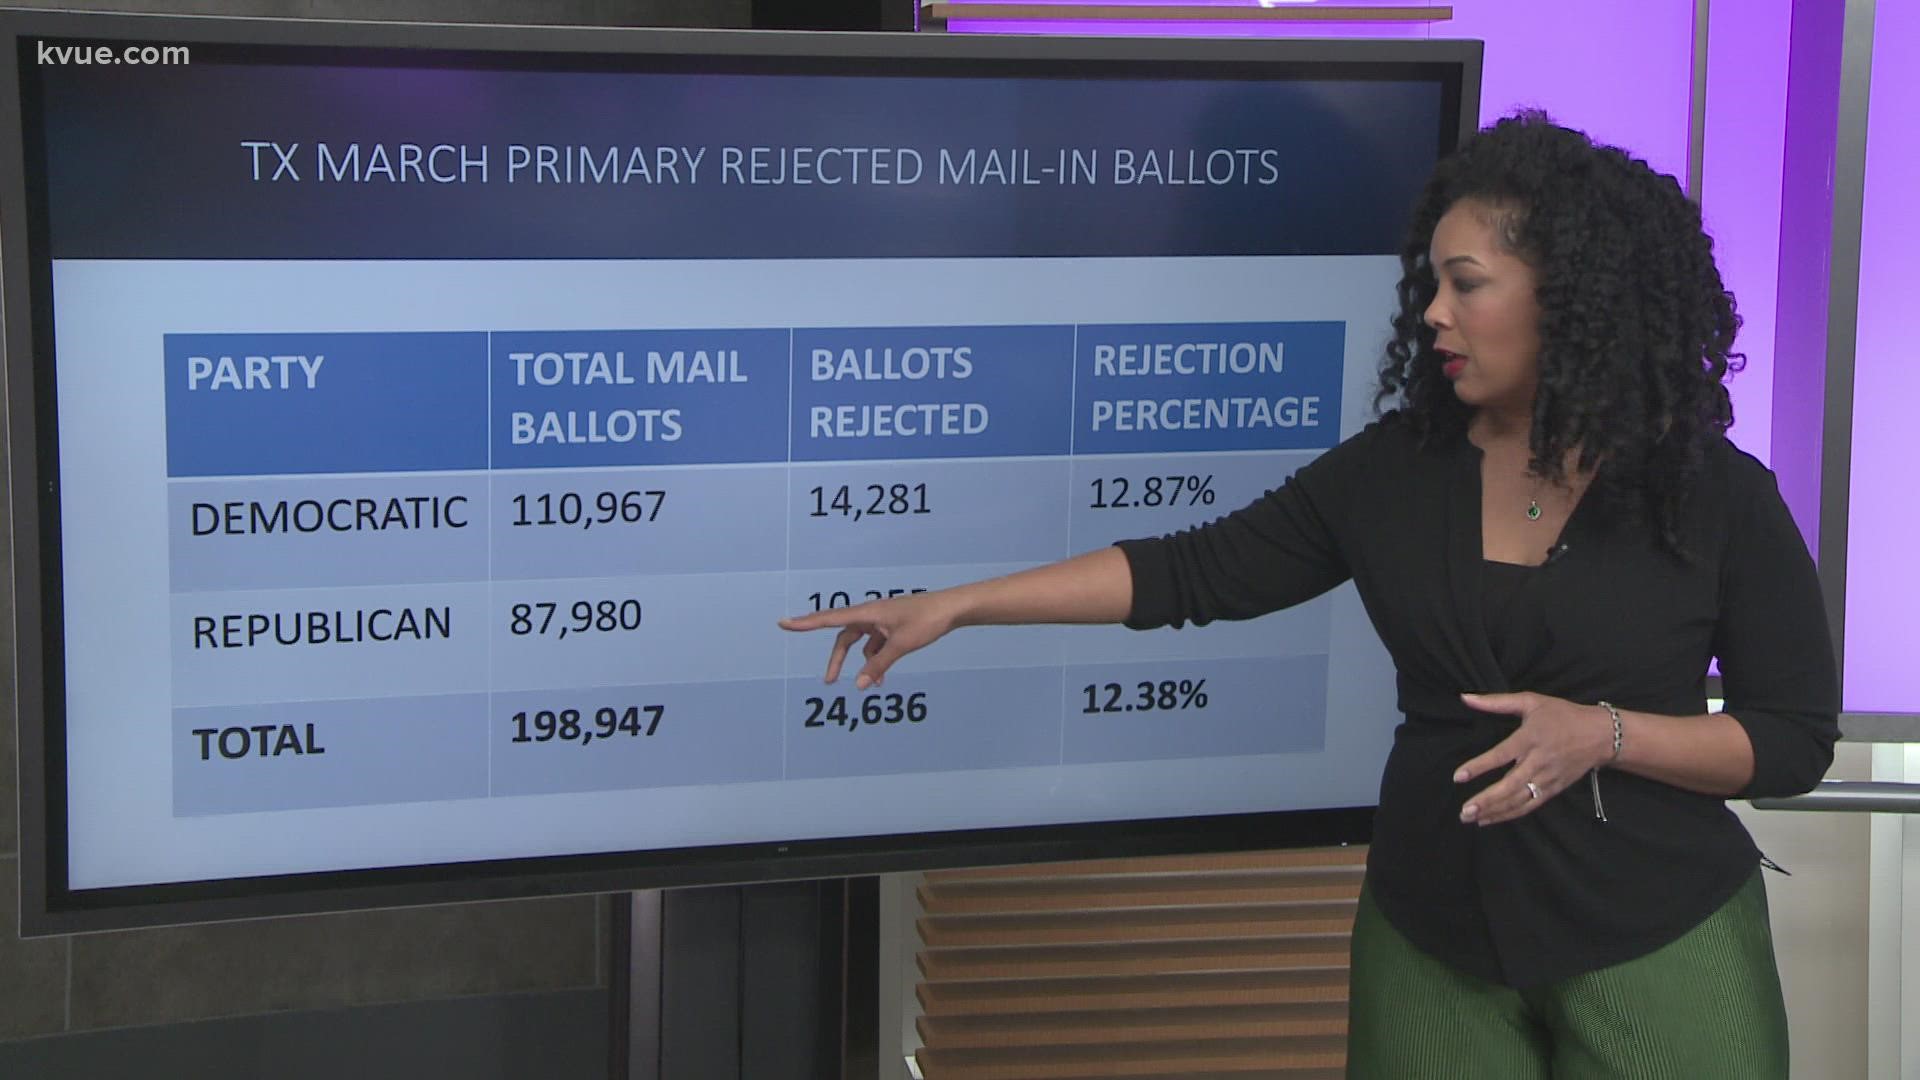 More registered Democrats applied for mail-in ballots than Republicans.